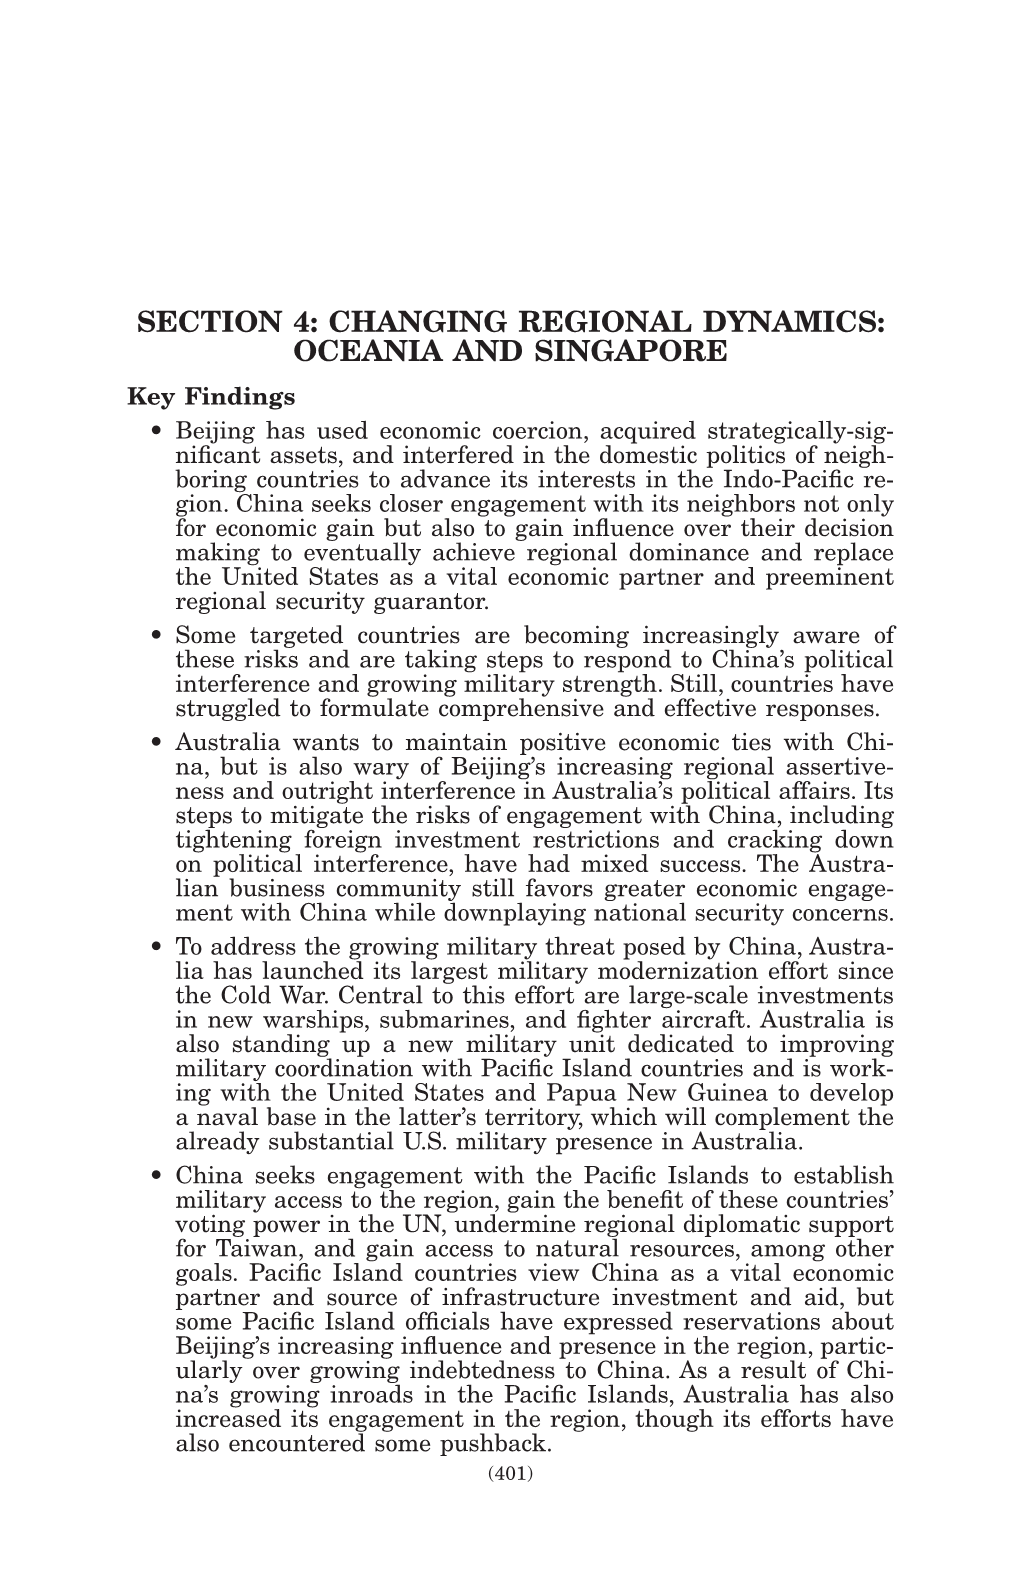 Changing Regional Dynamics: Oceania and Singapore